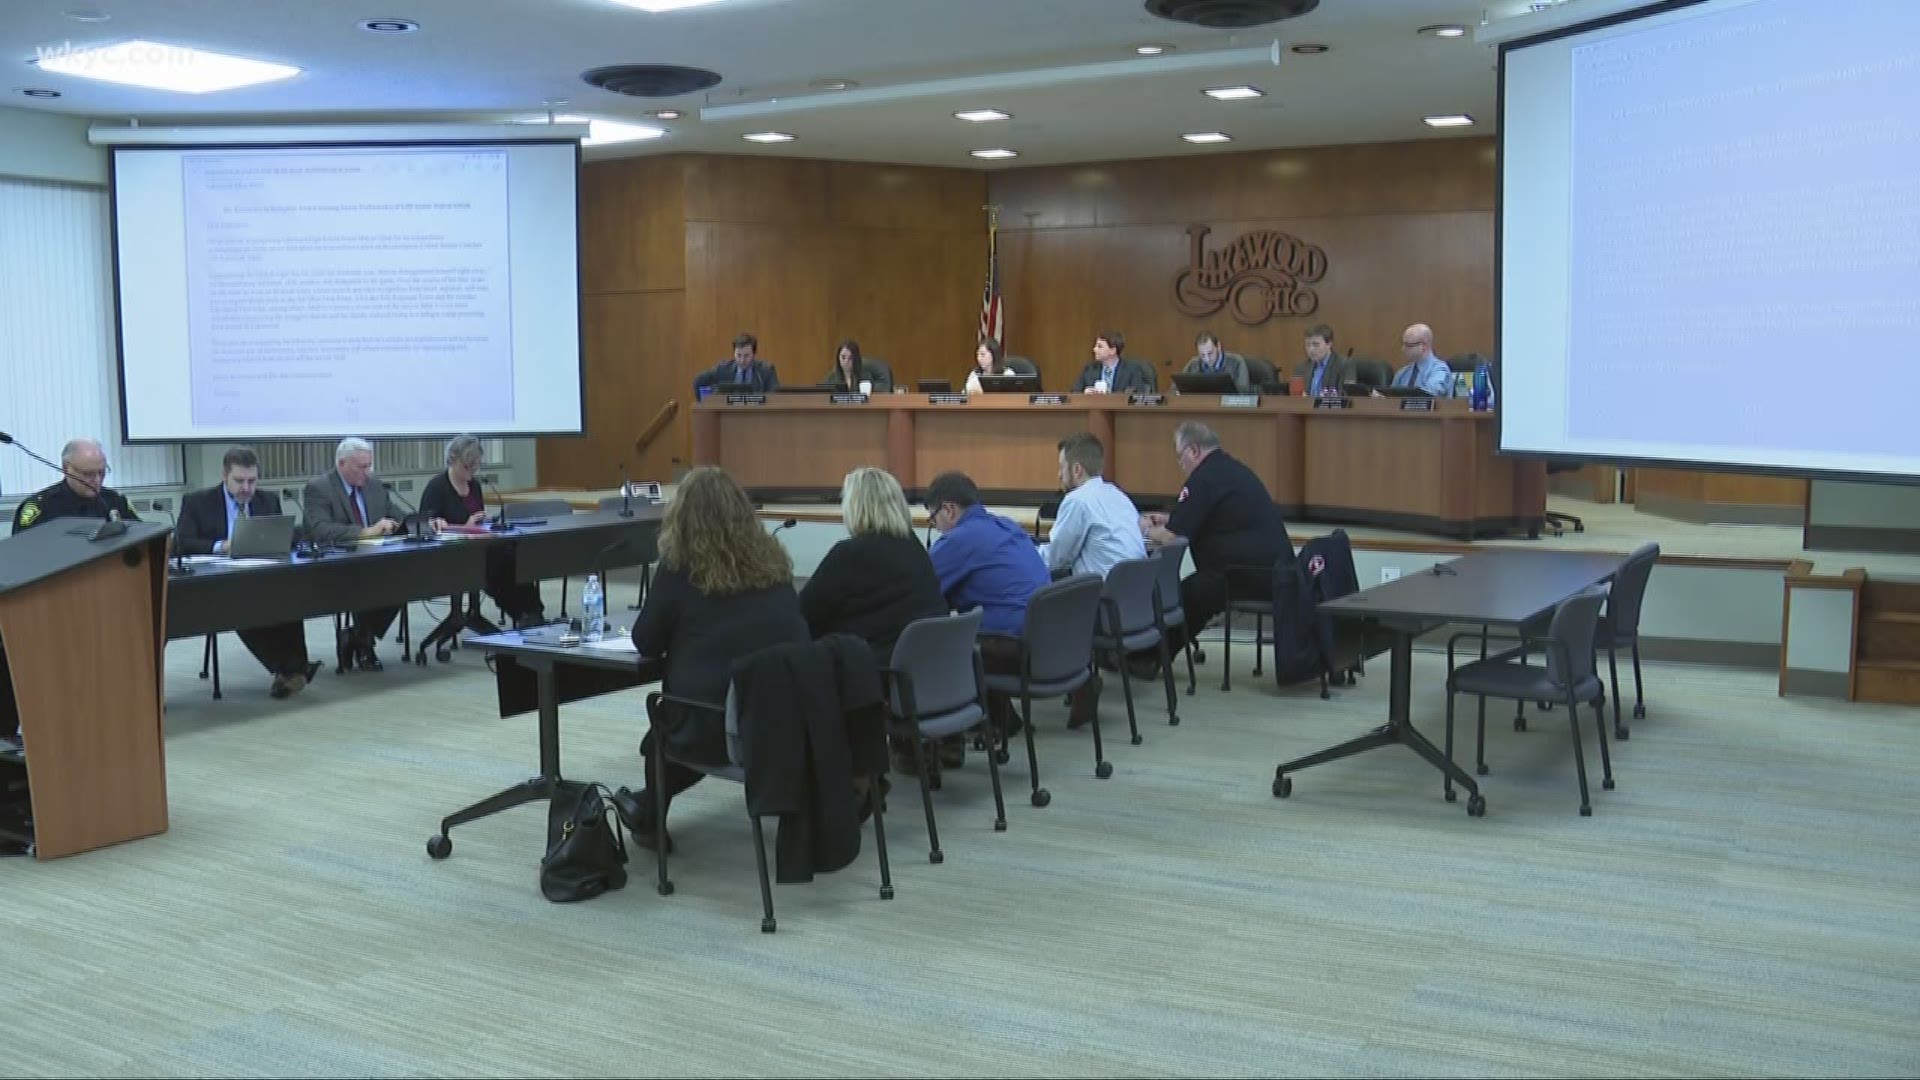 Lakewood City Council considering paid paternal leave for city employees